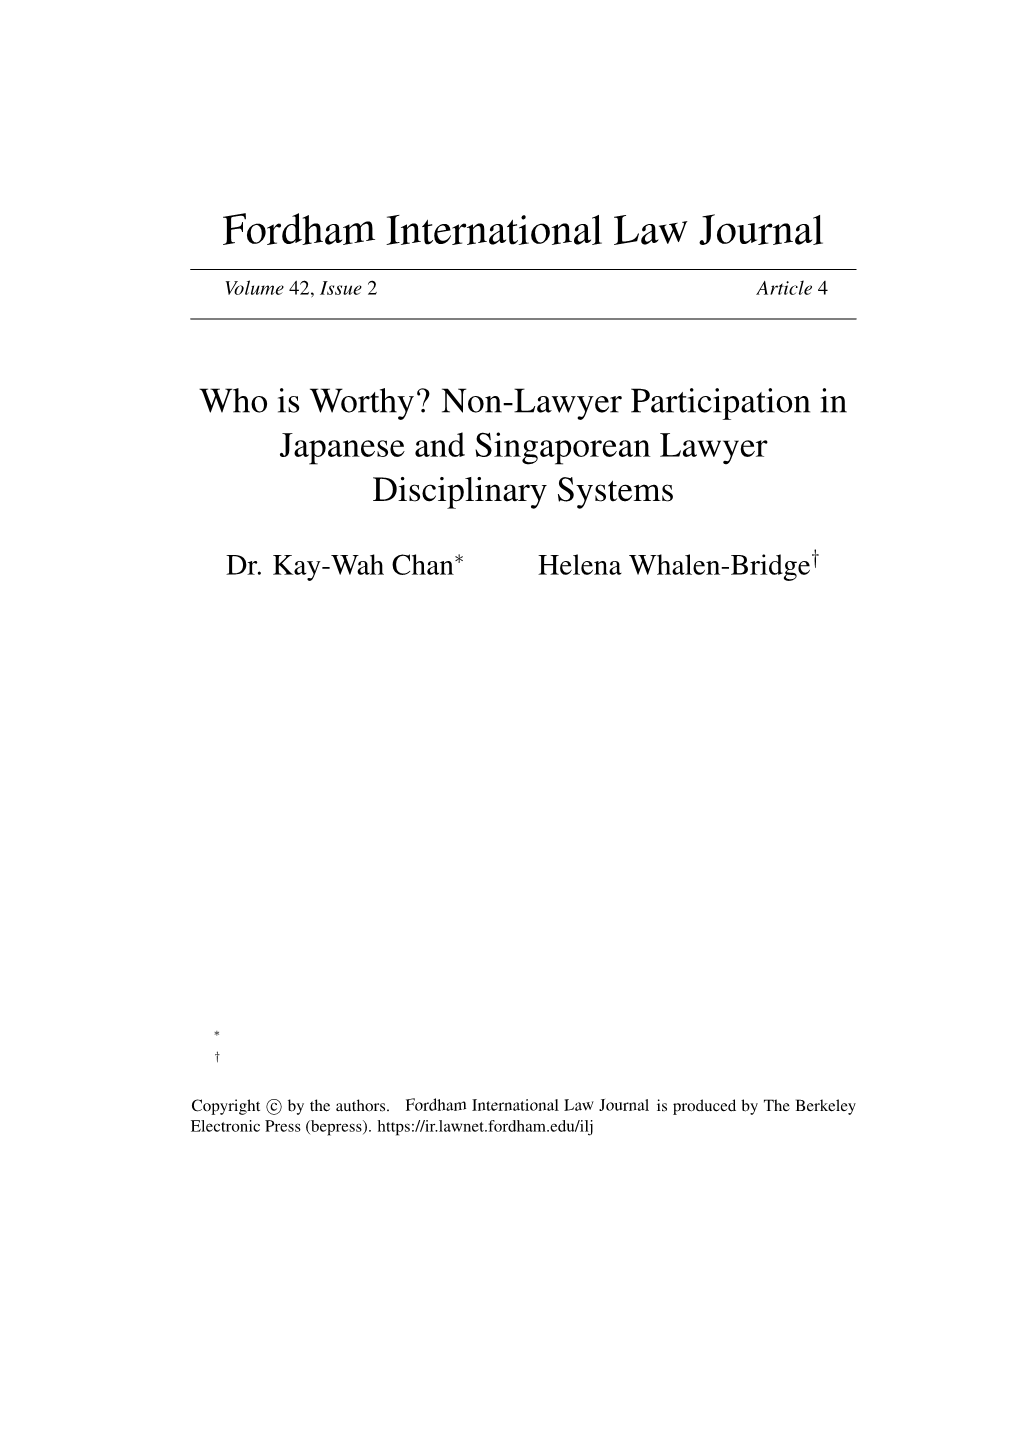 Who Is Worthy? Non-Lawyer Participation in Japanese and Singaporean Lawyer Disciplinary Systems